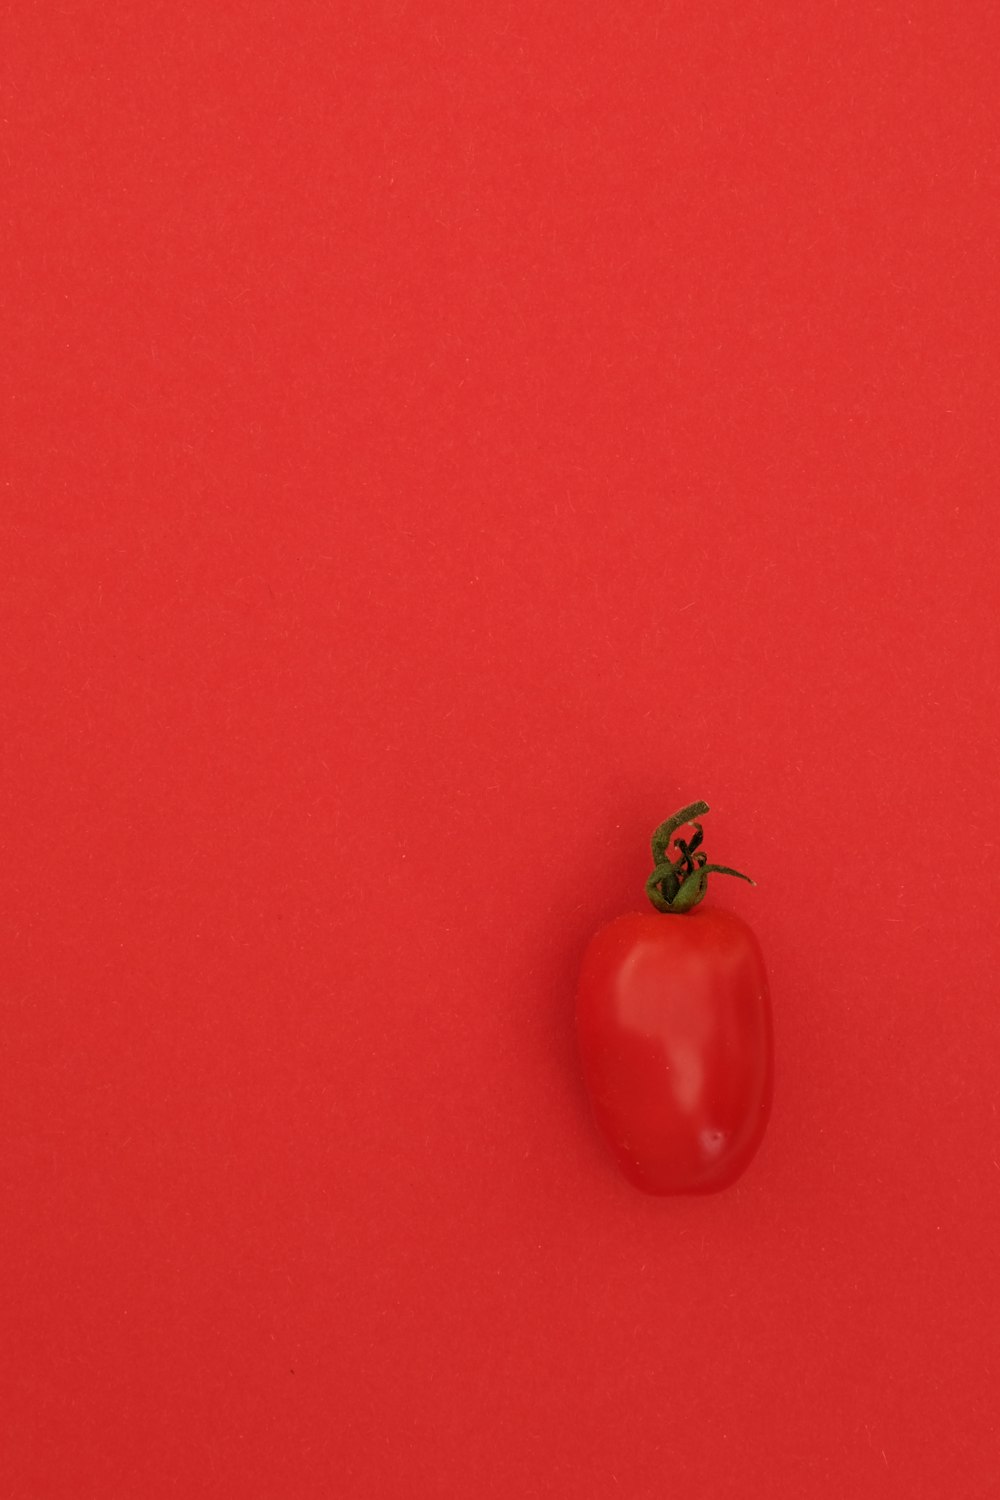 red tomato on red table